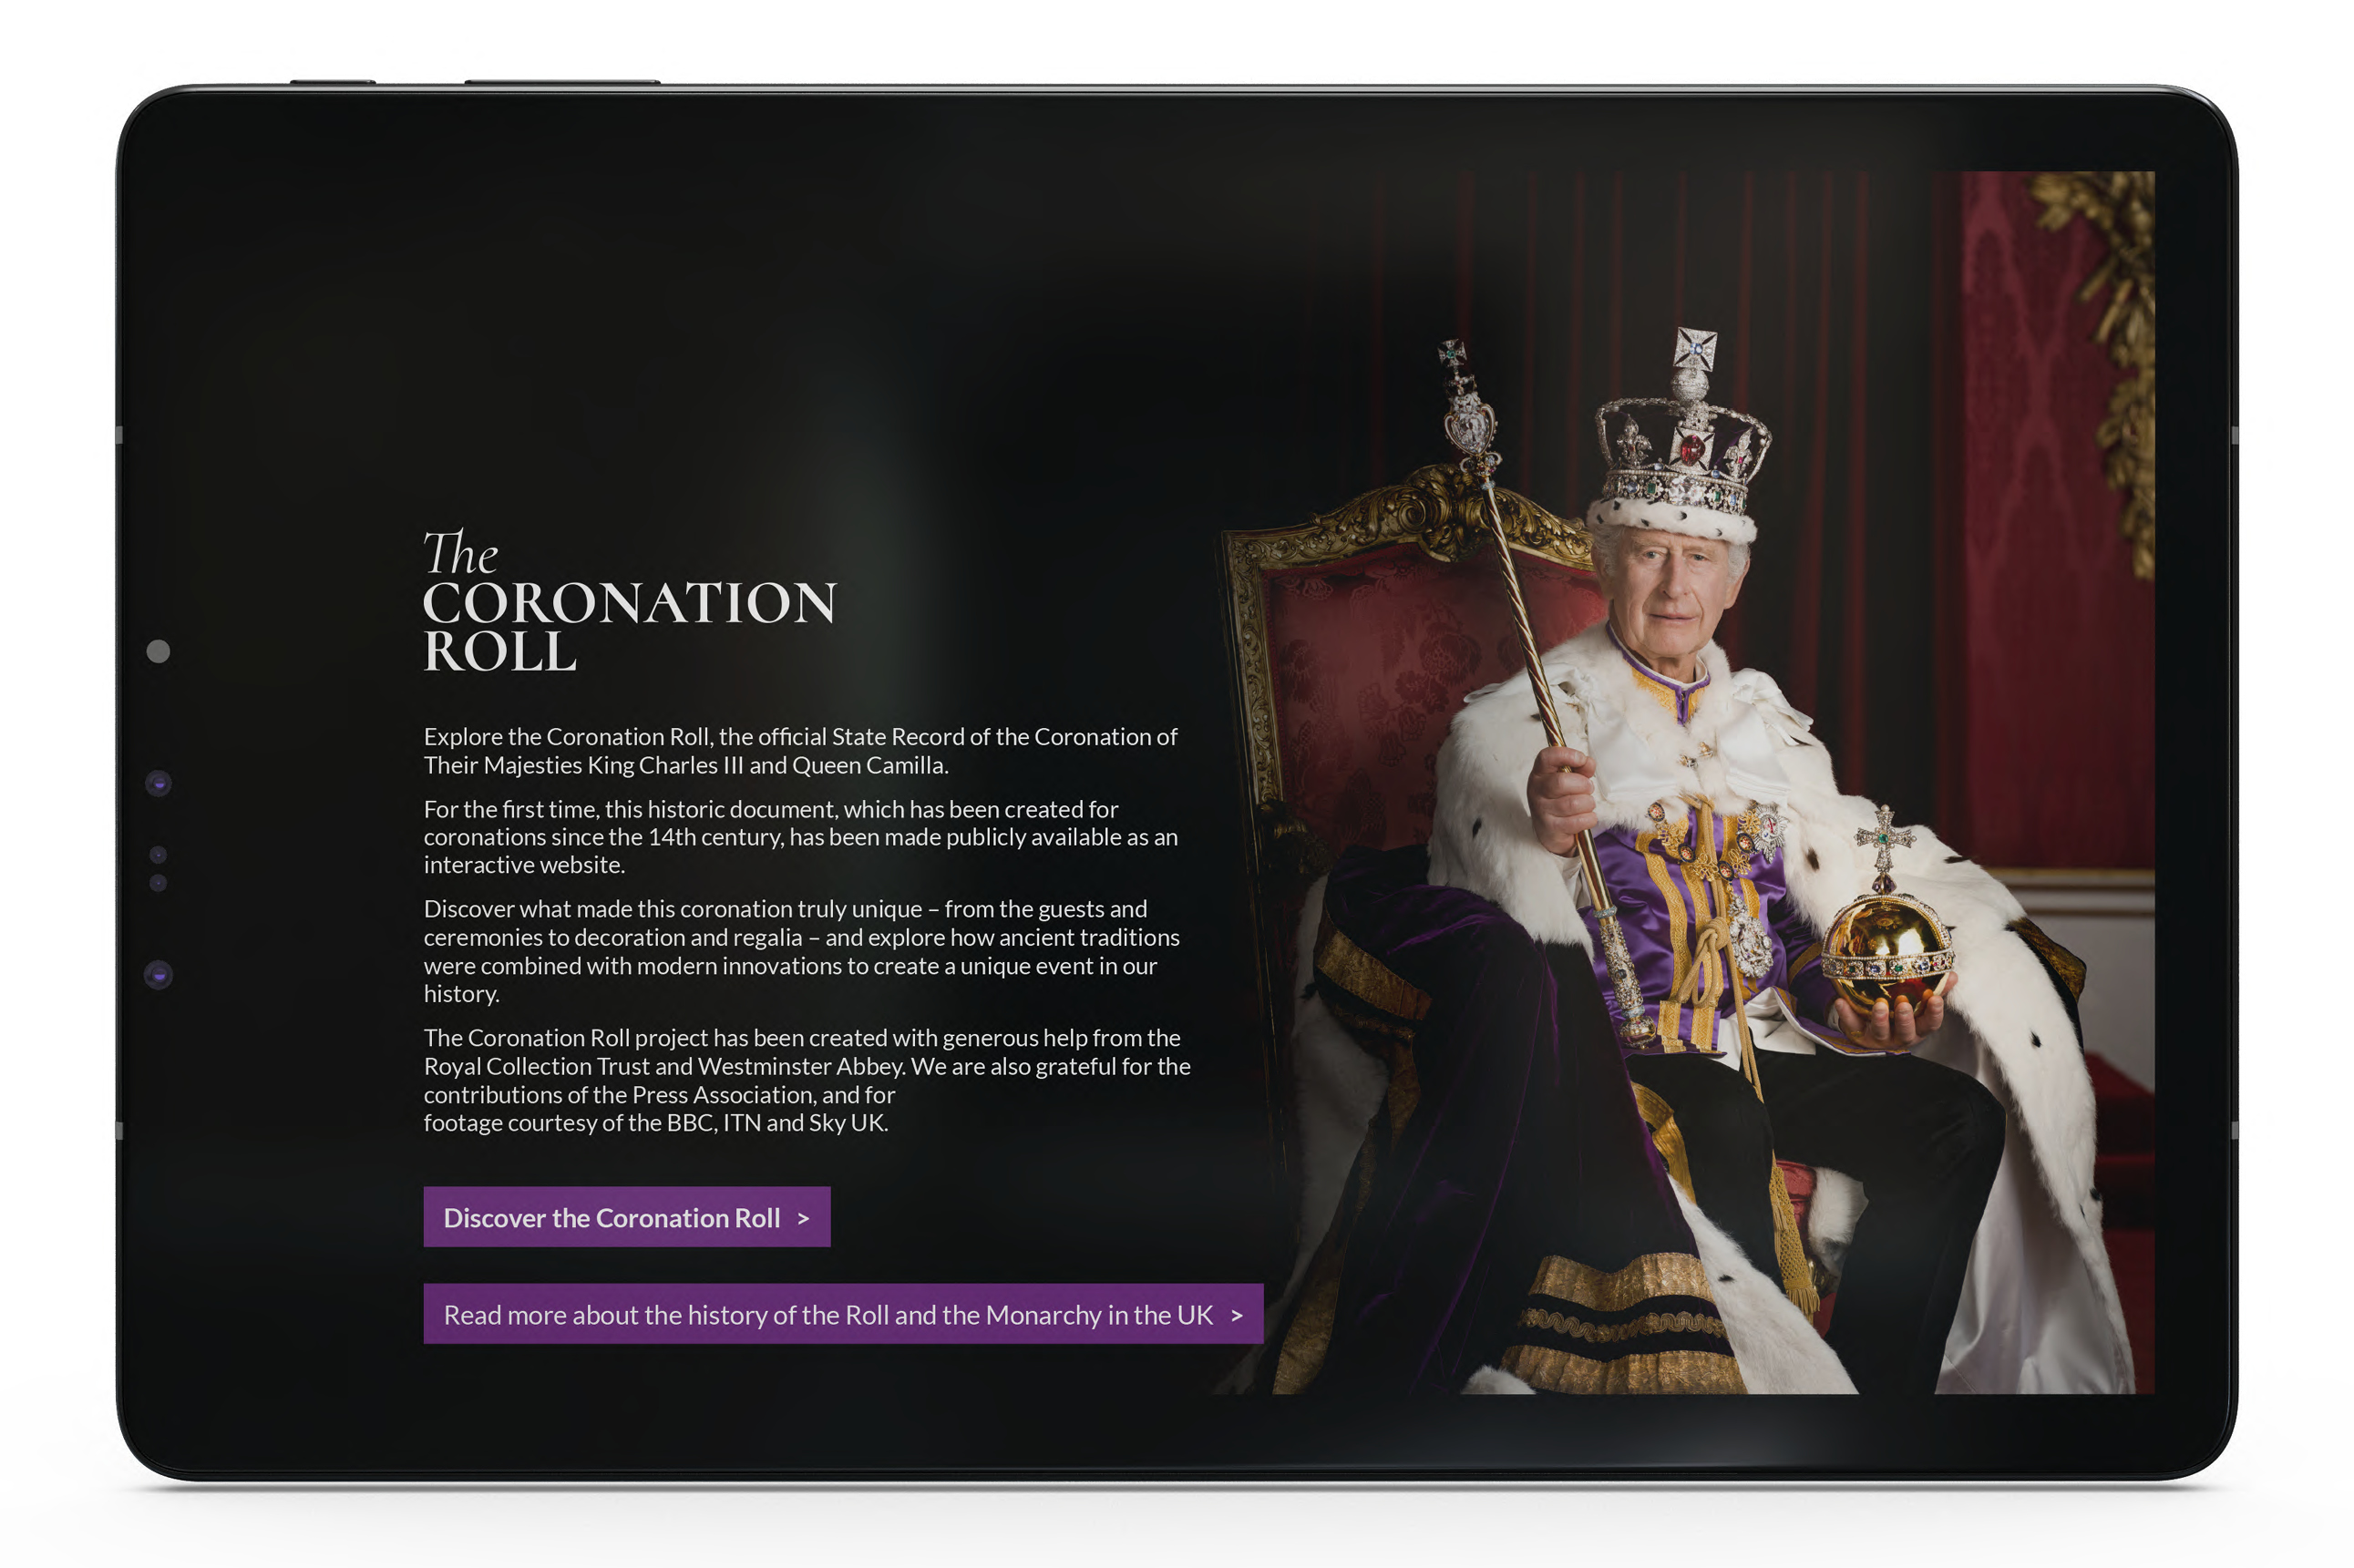 Mock up of the Coronation roll website homepage as it would appear on a desktop computer